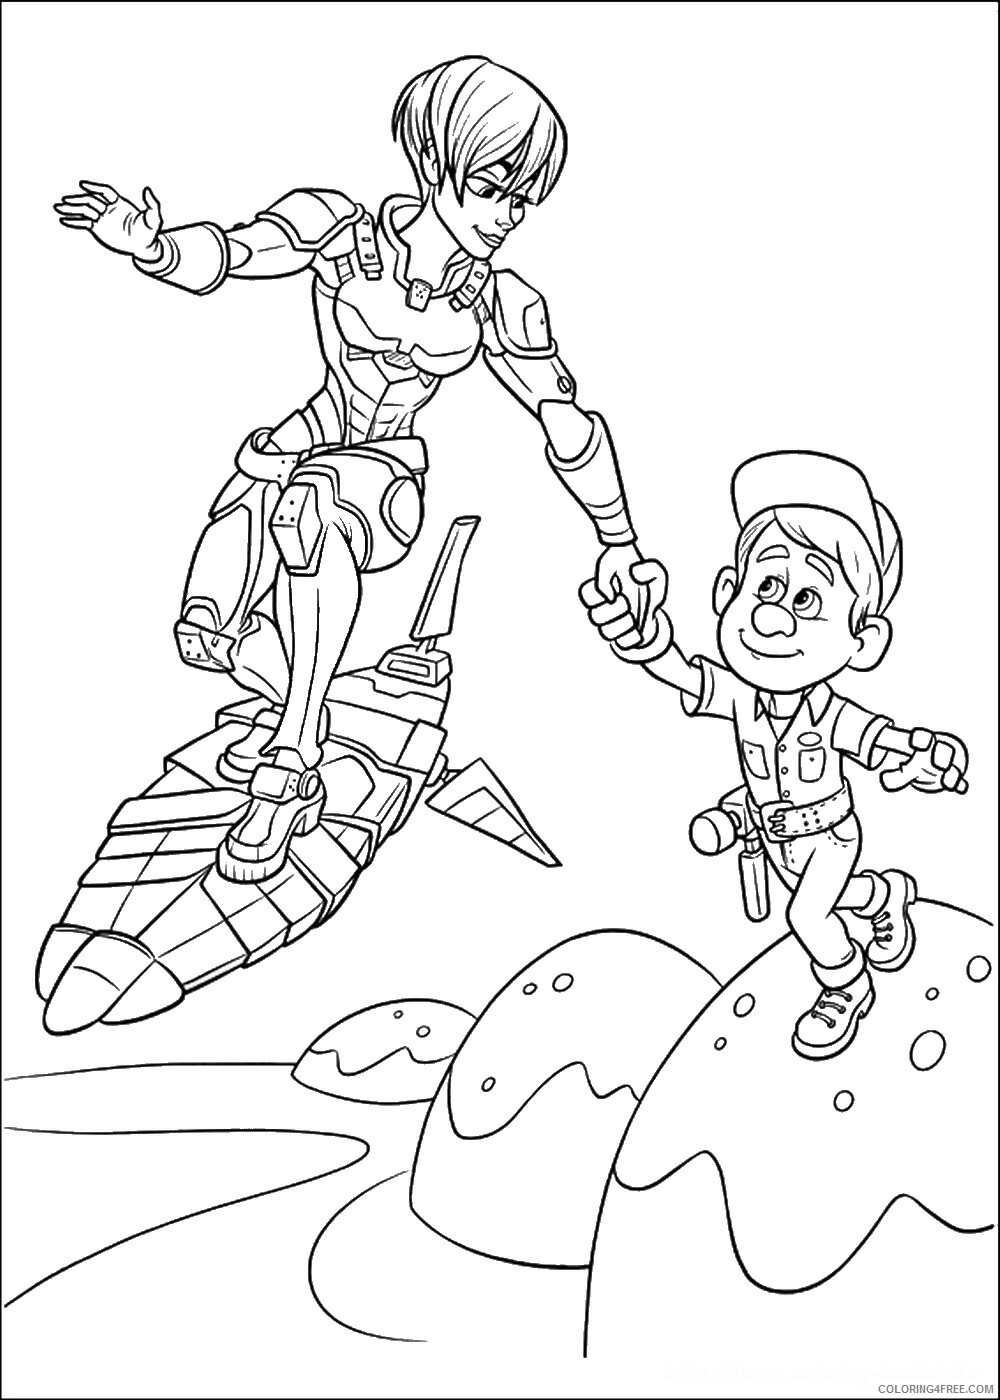 Wreck It Ralph Coloring Pages TV Film ralph_cl_09 Printable 2020 11796 Coloring4free